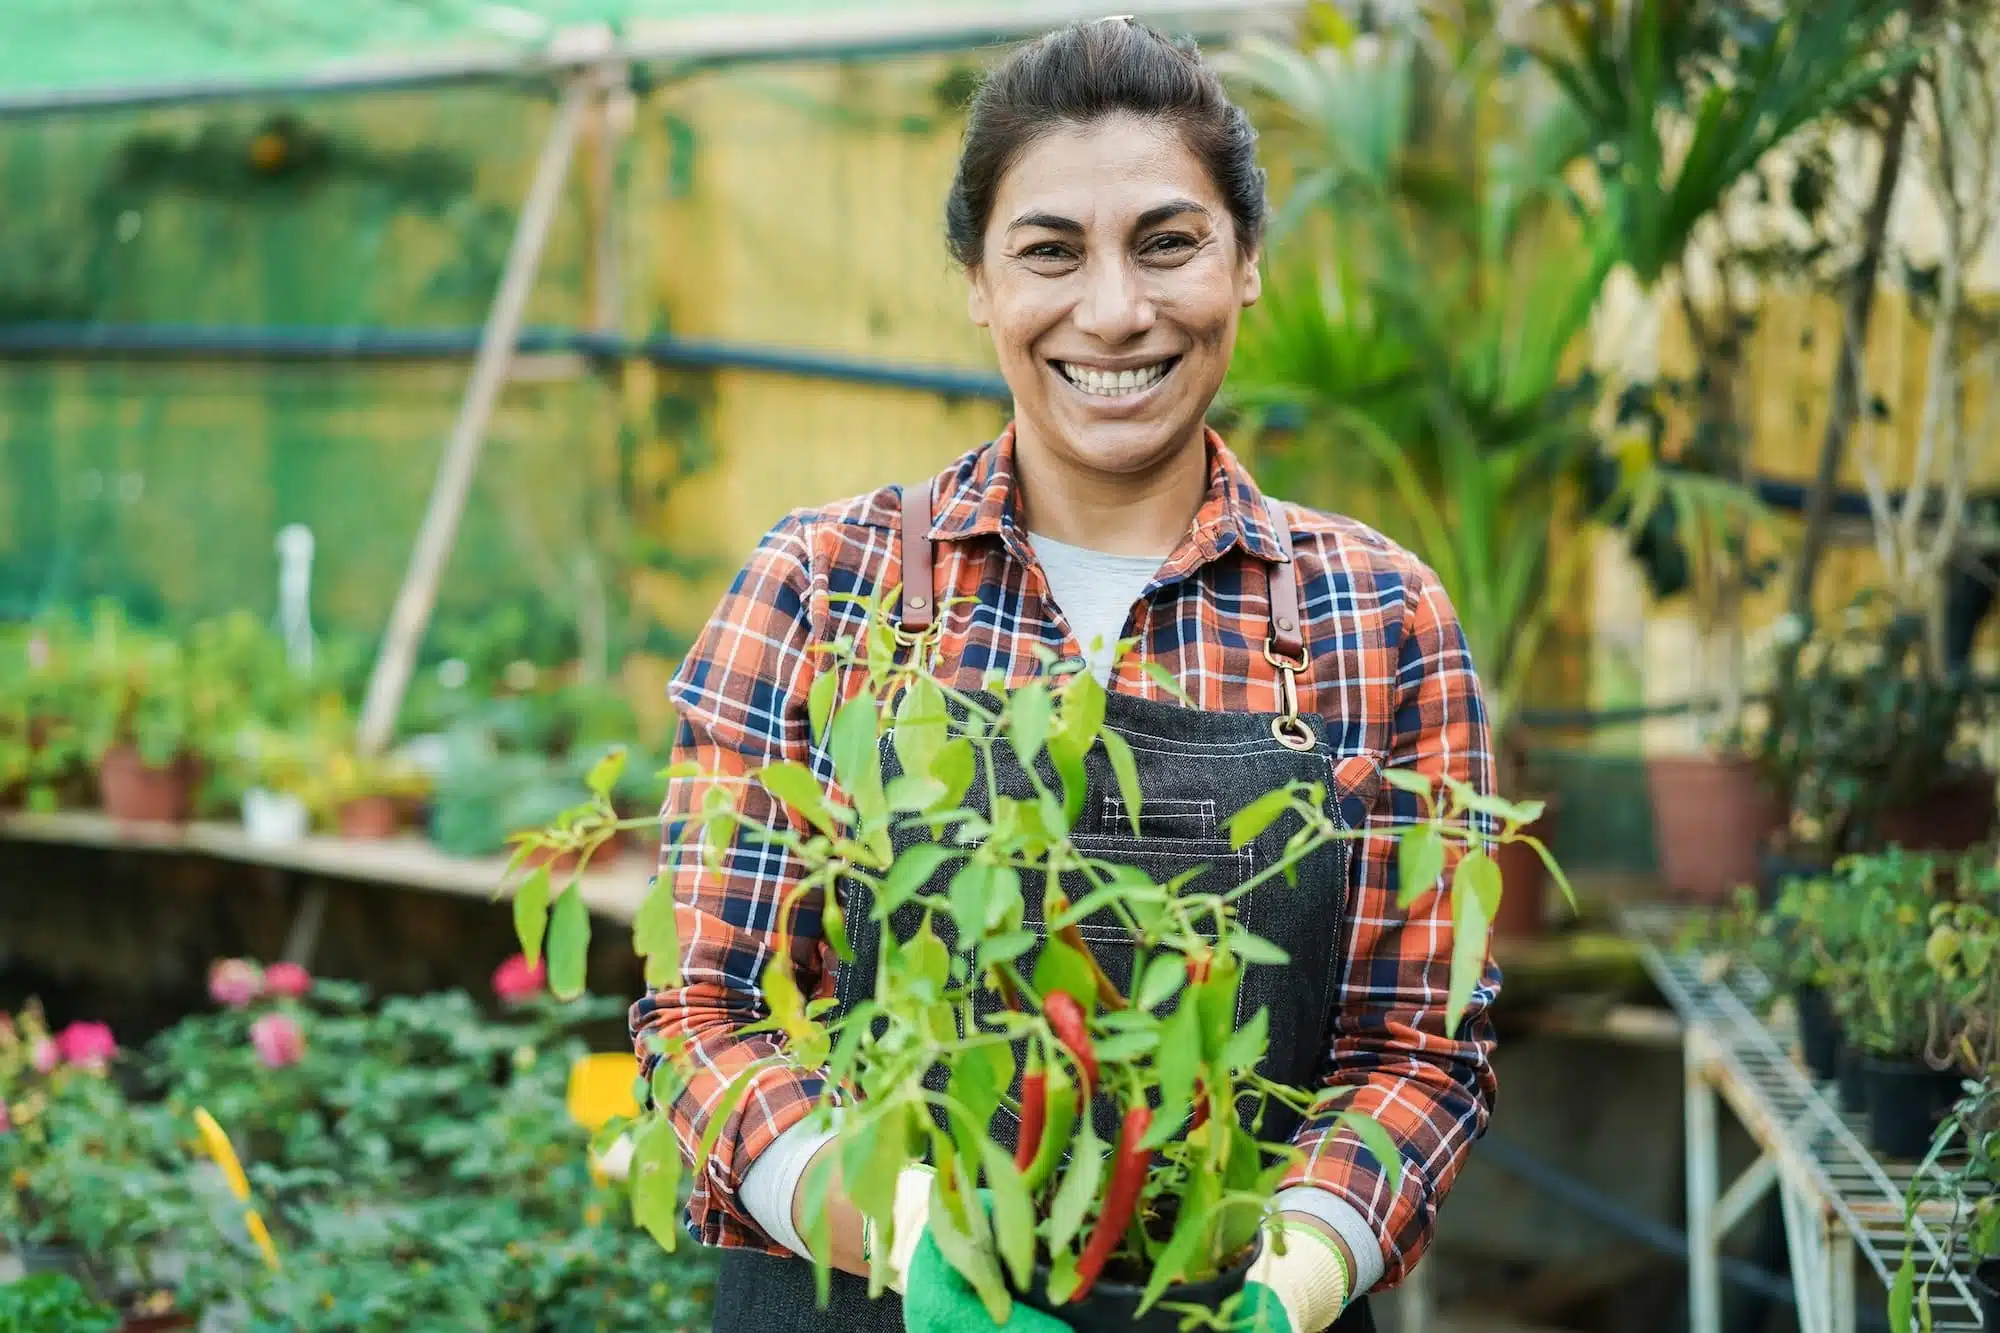 Happy latin woman working inside greenhouse garden - Nursery and spring concept - Focus on face